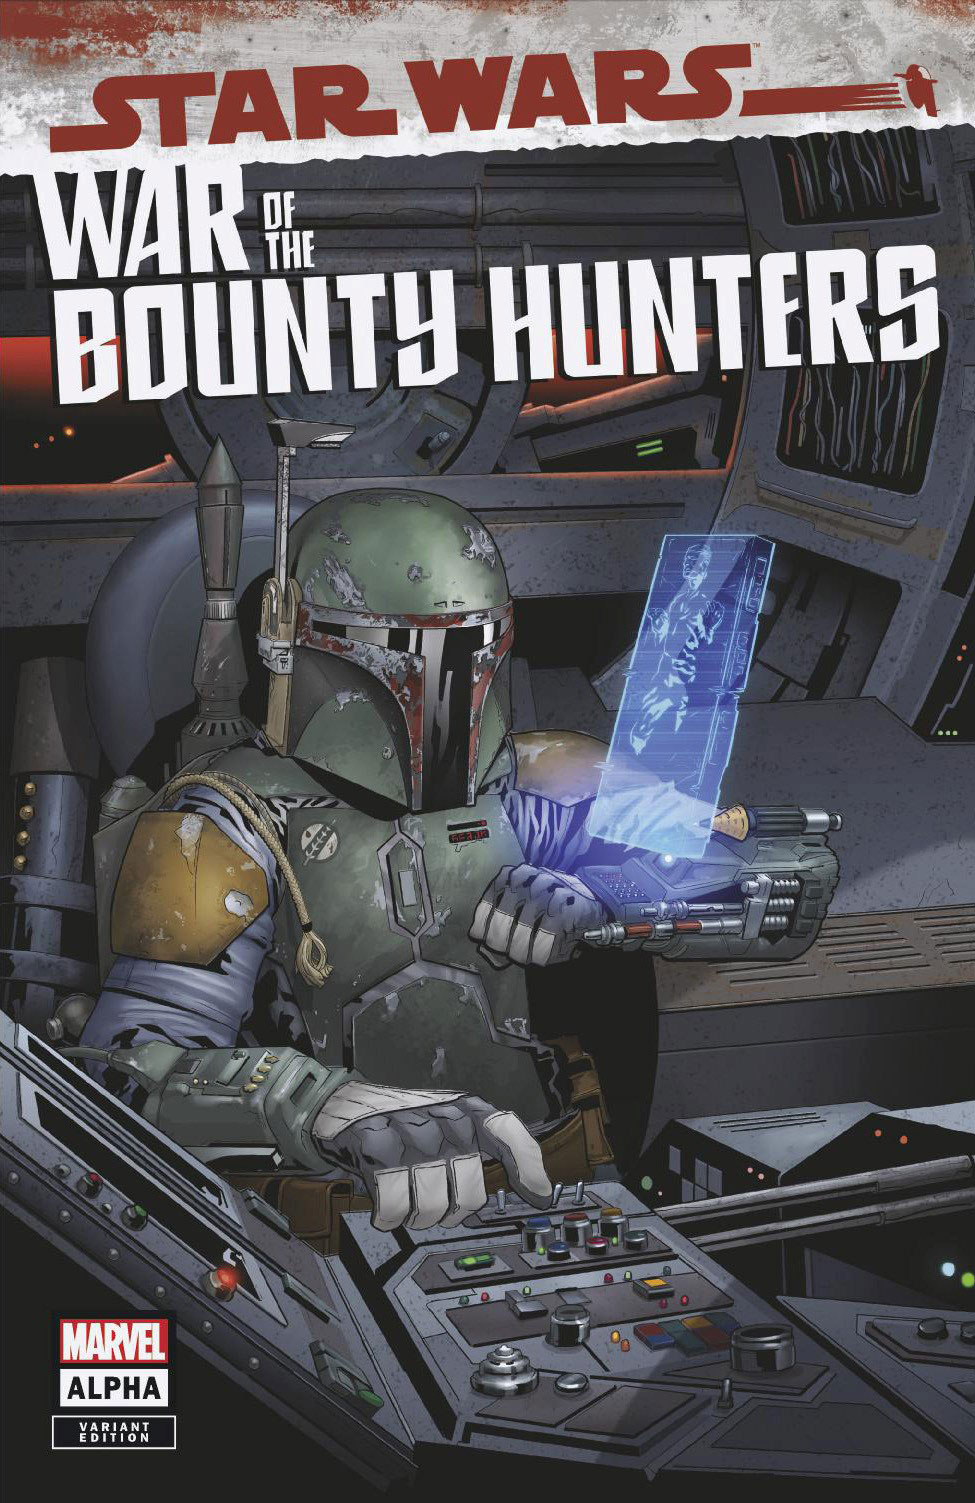 War of the Bounty Hunters Alpha #1 (Will Sliney Jetpack Comics Variant Cover) (05.05.2021)